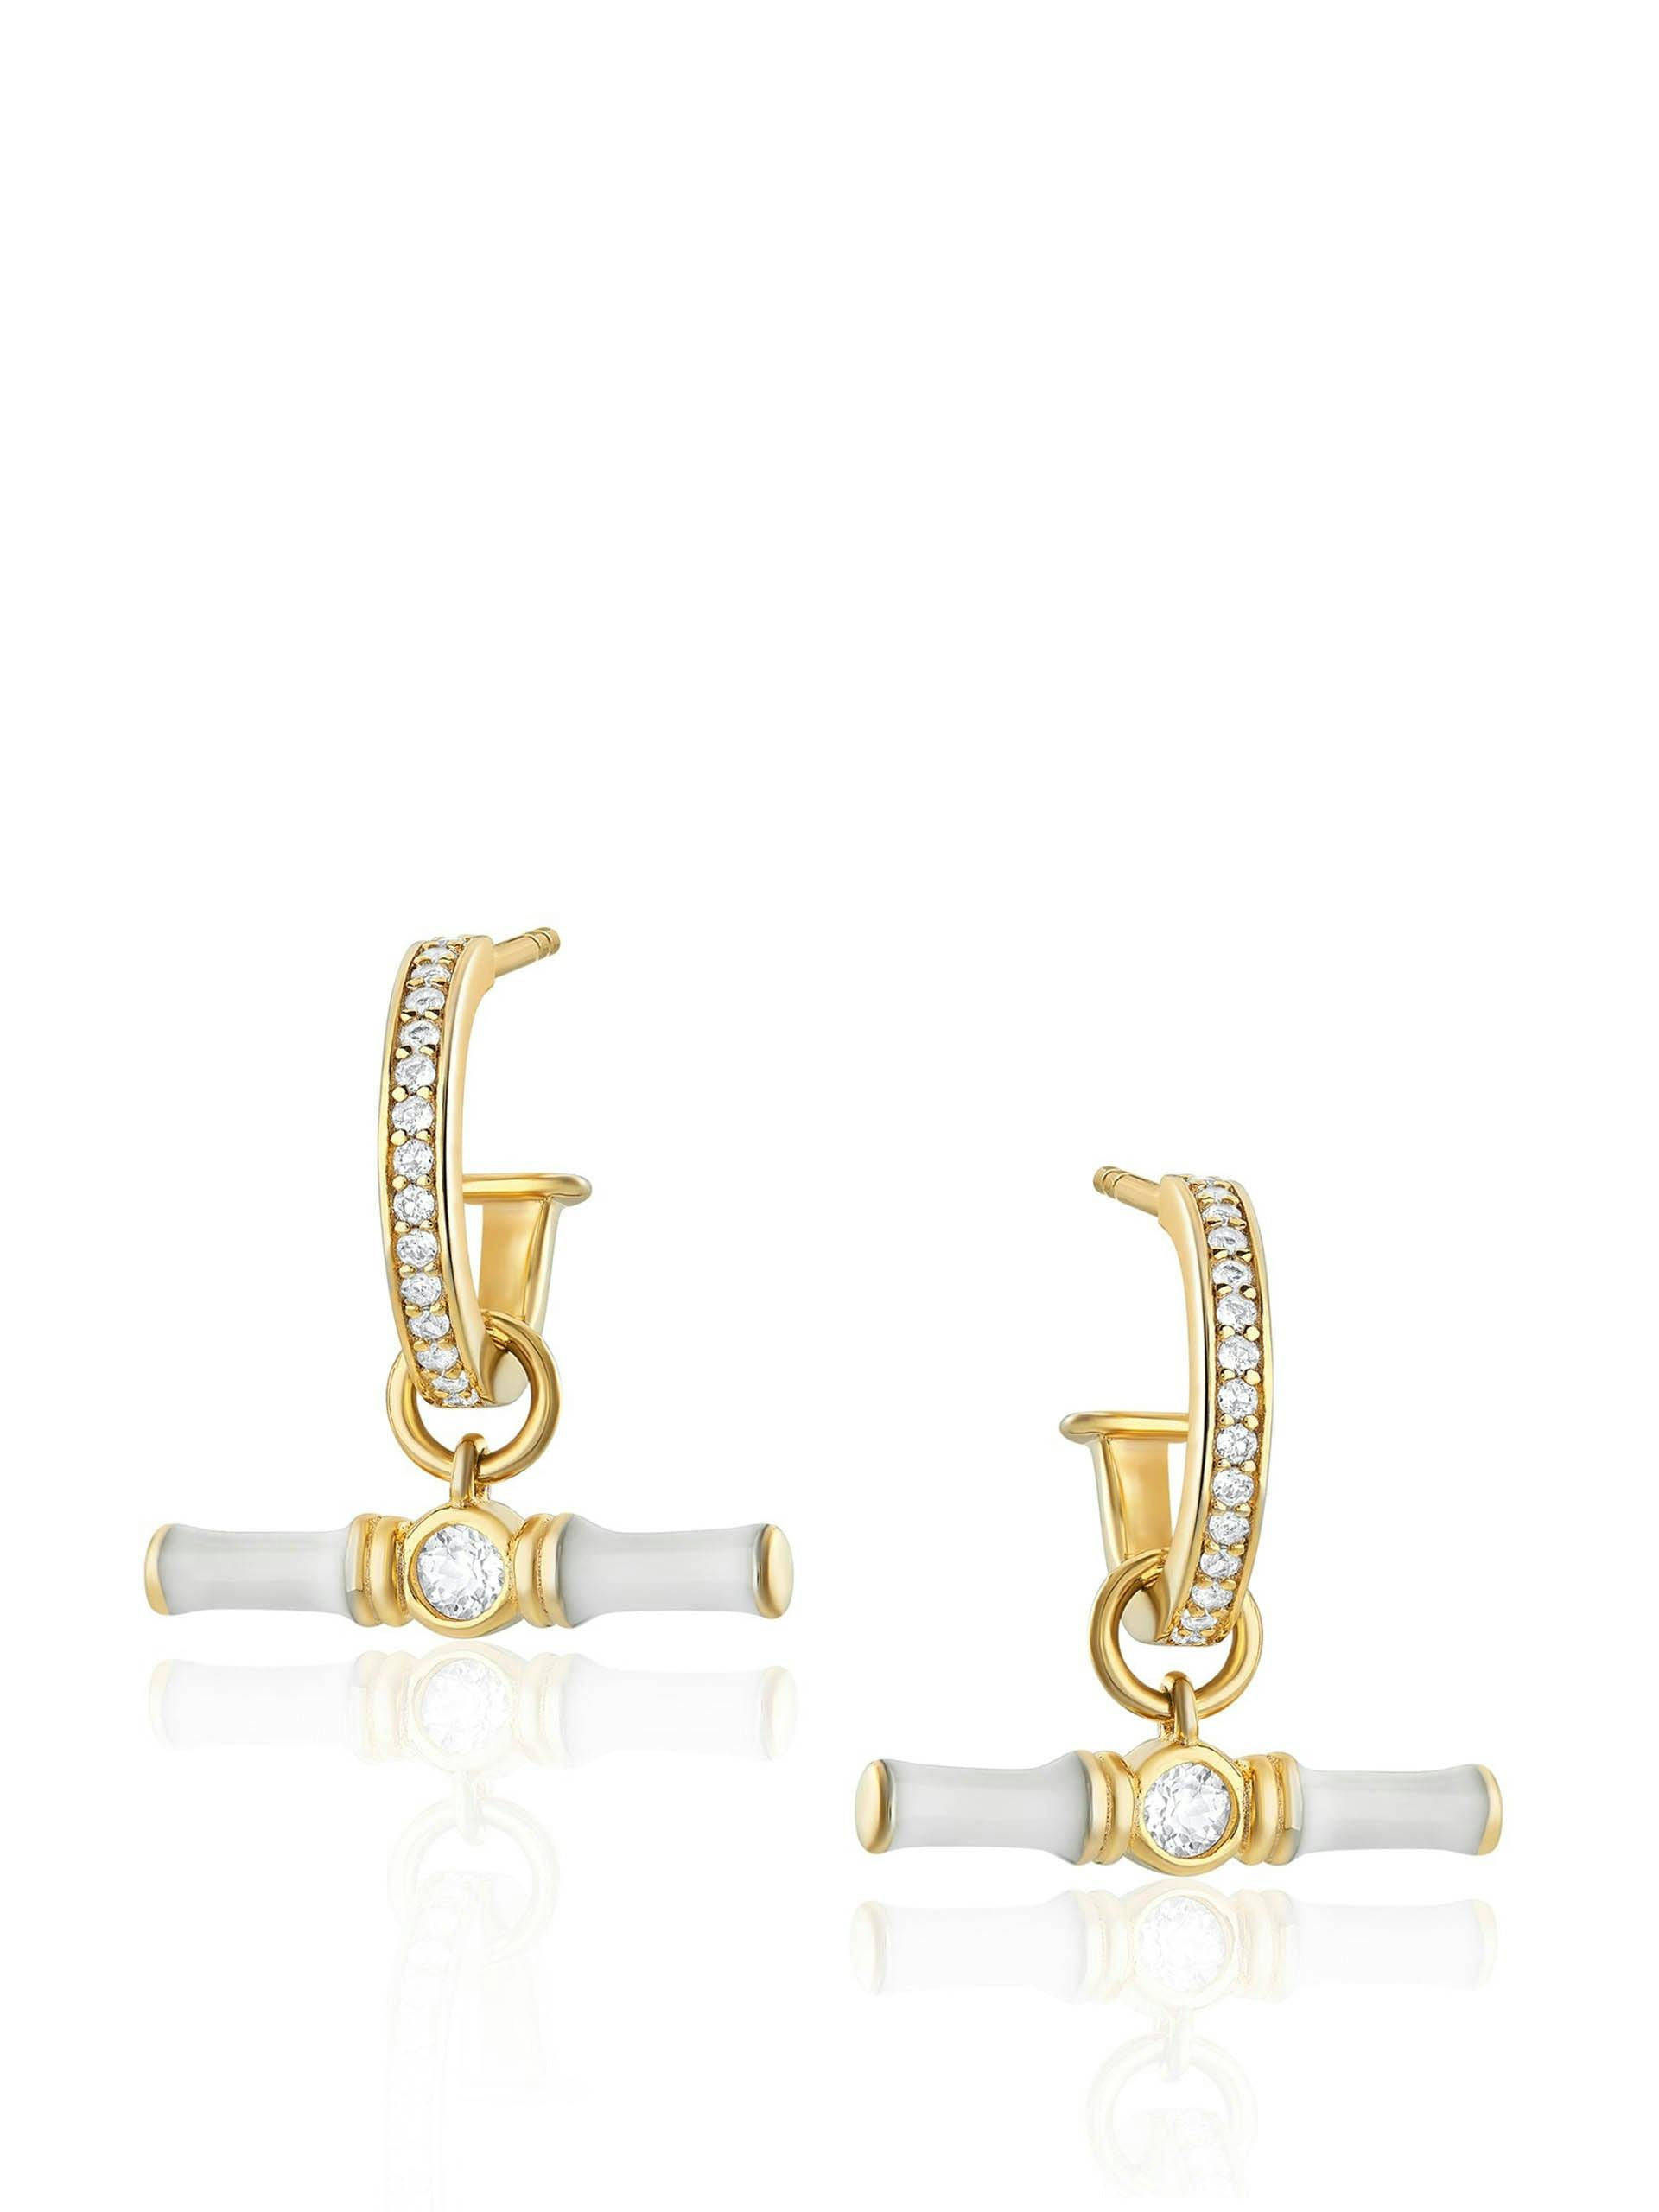 White topaz and gold Dyllan hoop earrings with white enamel t-bar charms